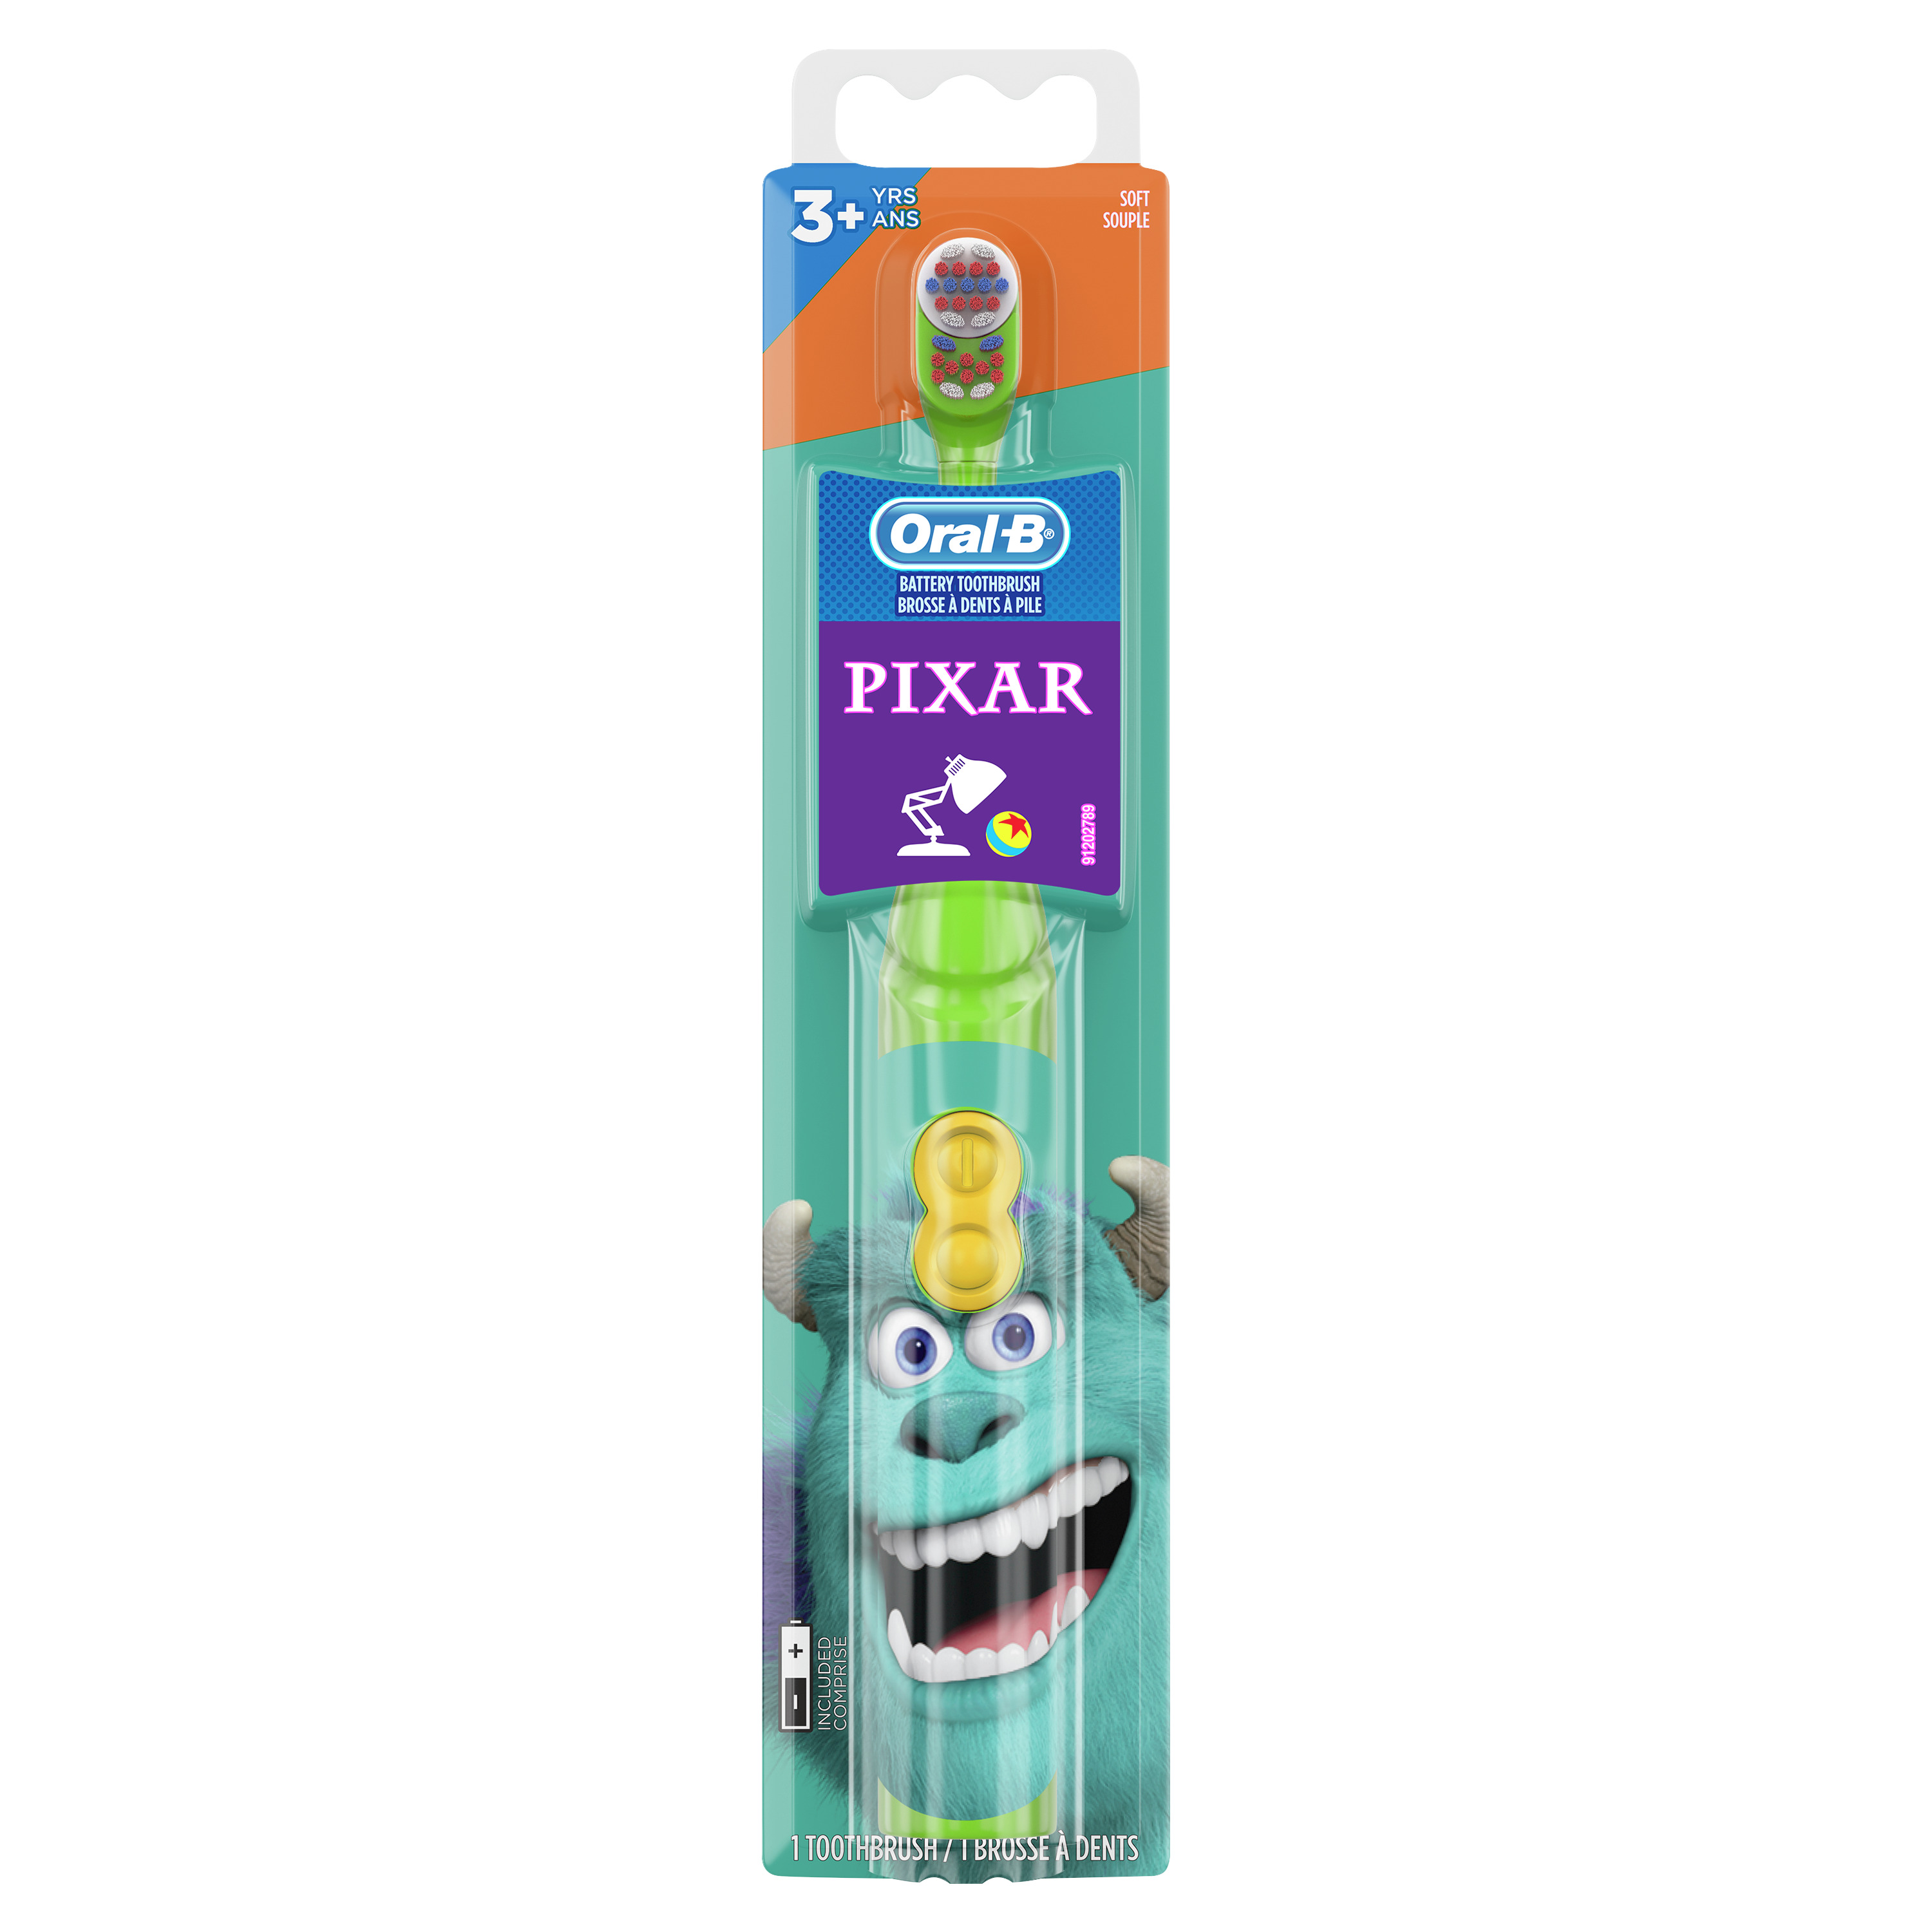 Oral-B Kid's Battery Toothbrush Featuring PIXAR Favorites, Full Head, Soft Bristles, for Children 3+ - image 1 of 9